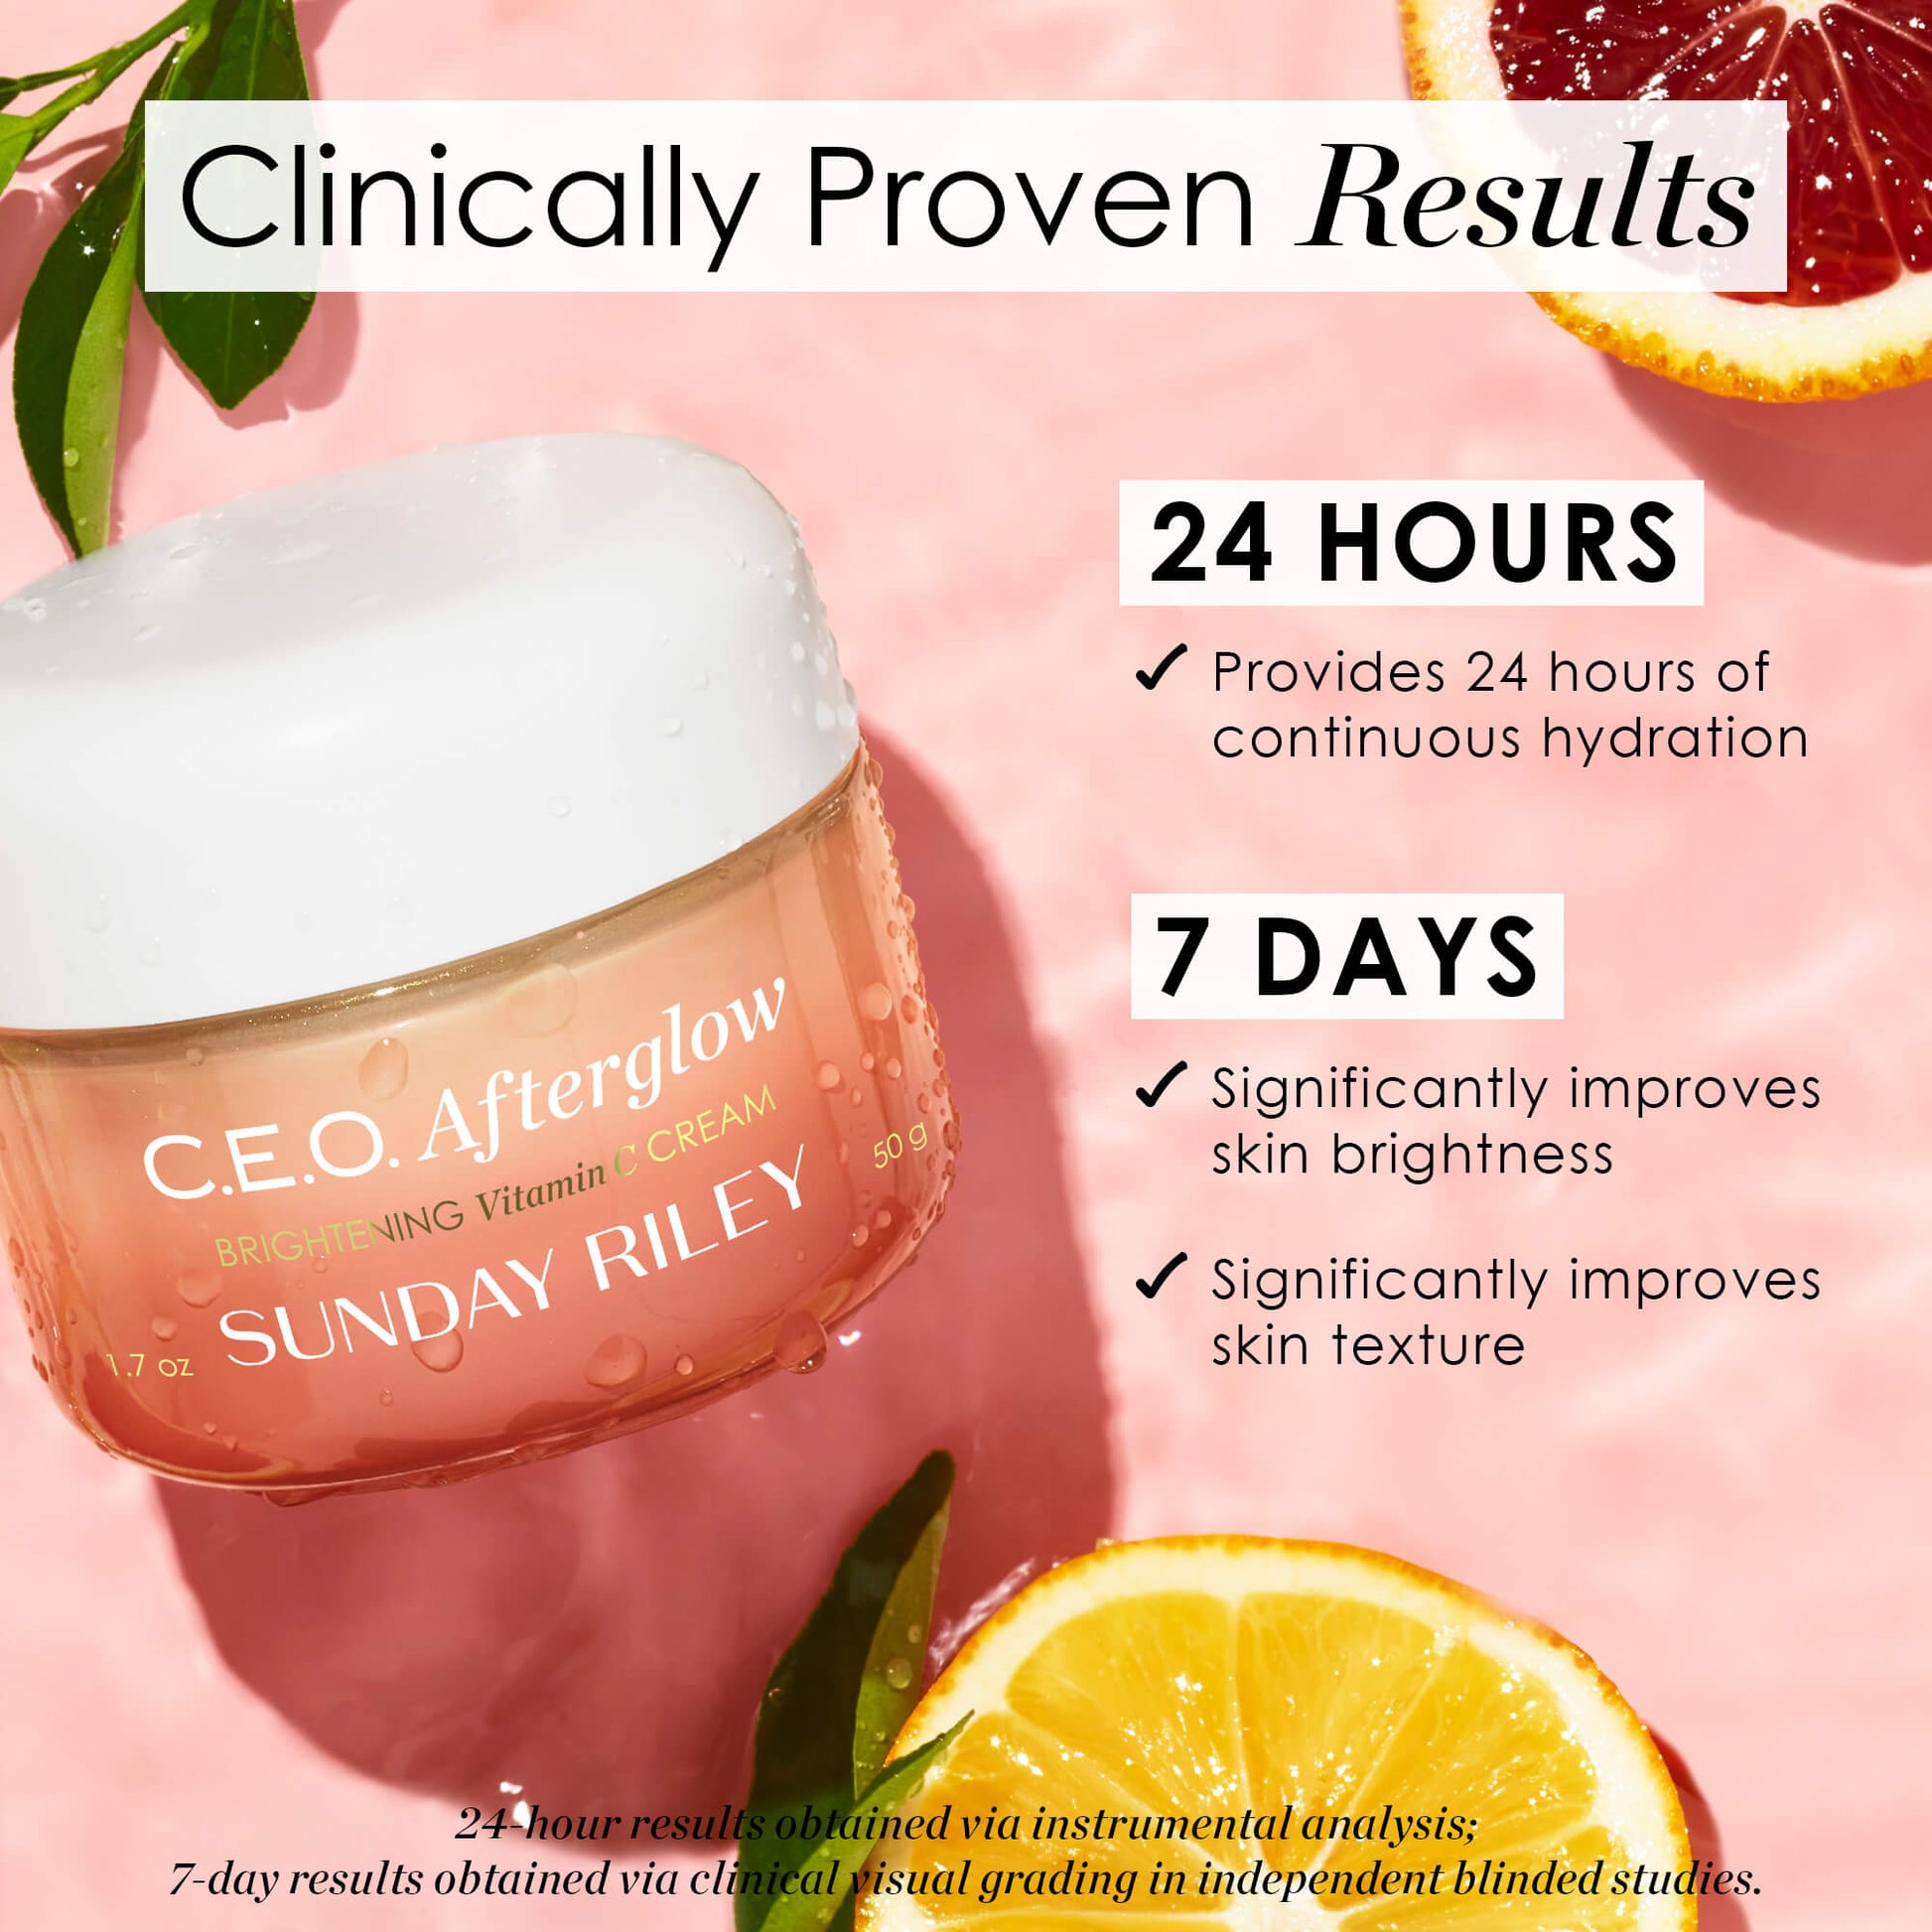 Infographic with C.E.O. Afterglow Brightening Vitamin C Cream product showing clinically proven results. In 24 hours it provides 24 hours of continuous hydration. In 7 days significantly improves skin brightness and significantly improves skin texture.